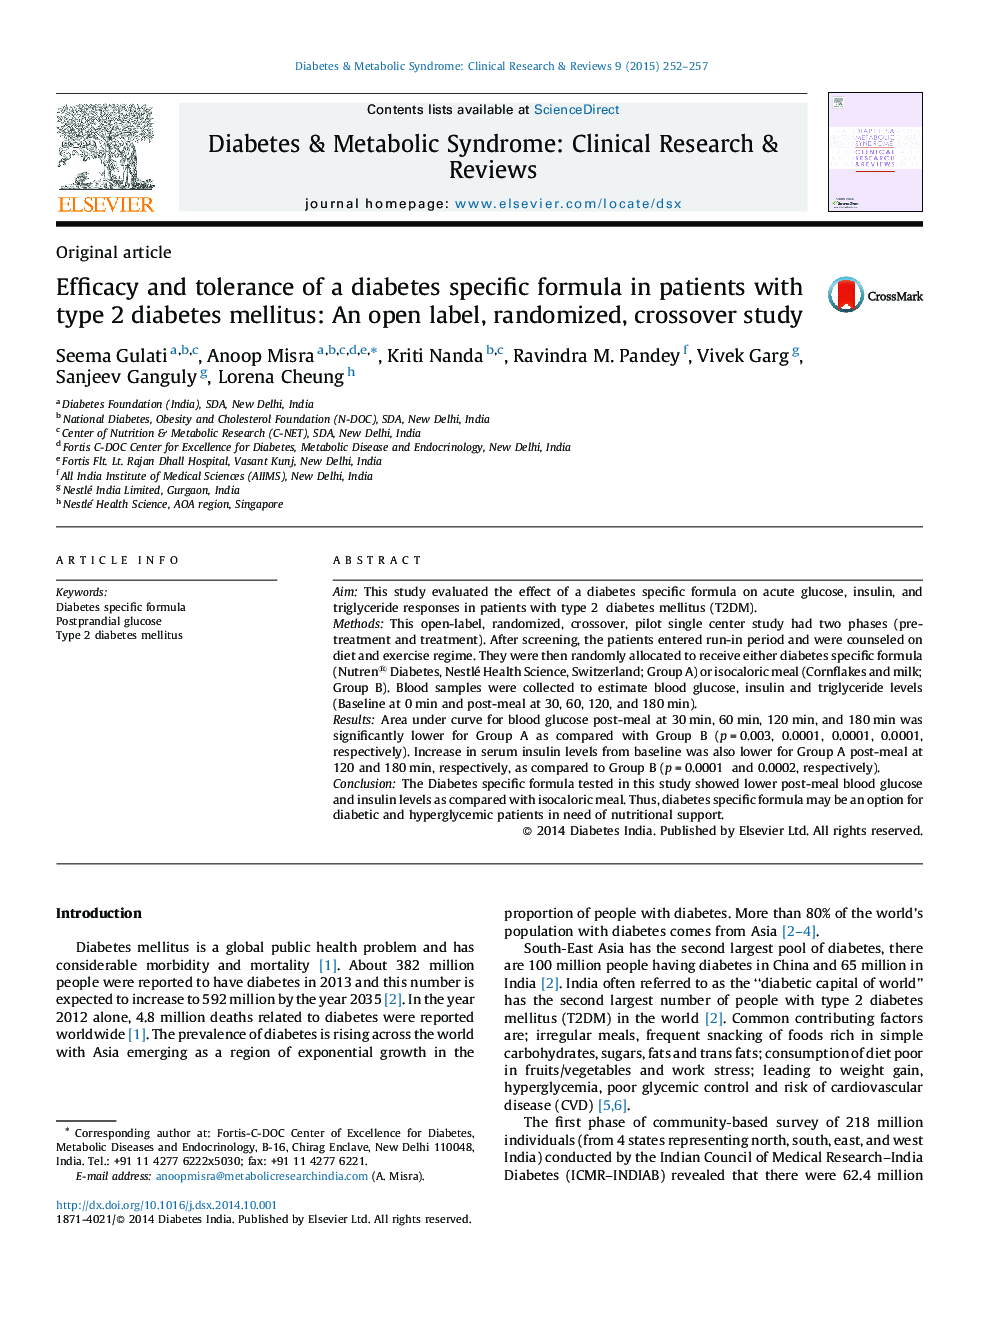 Efficacy and tolerance of a diabetes specific formula in patients with type 2 diabetes mellitus: An open label, randomized, crossover study